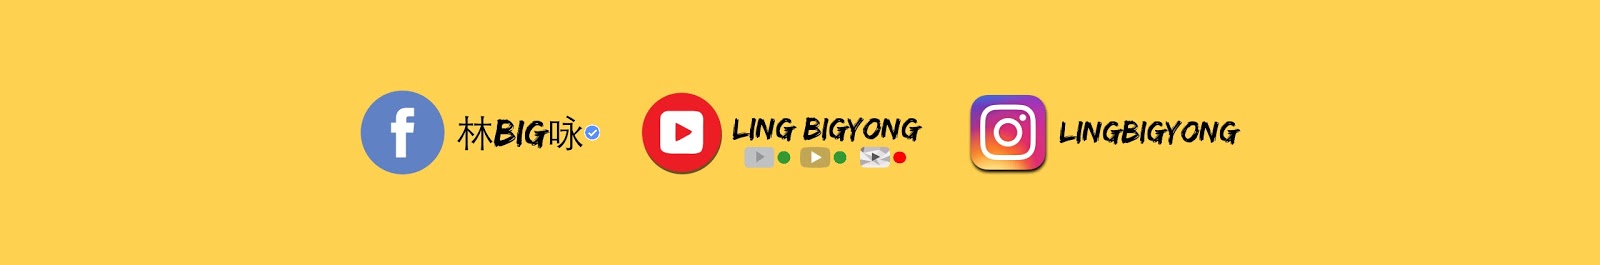 Ling BigYong YouTube Channel